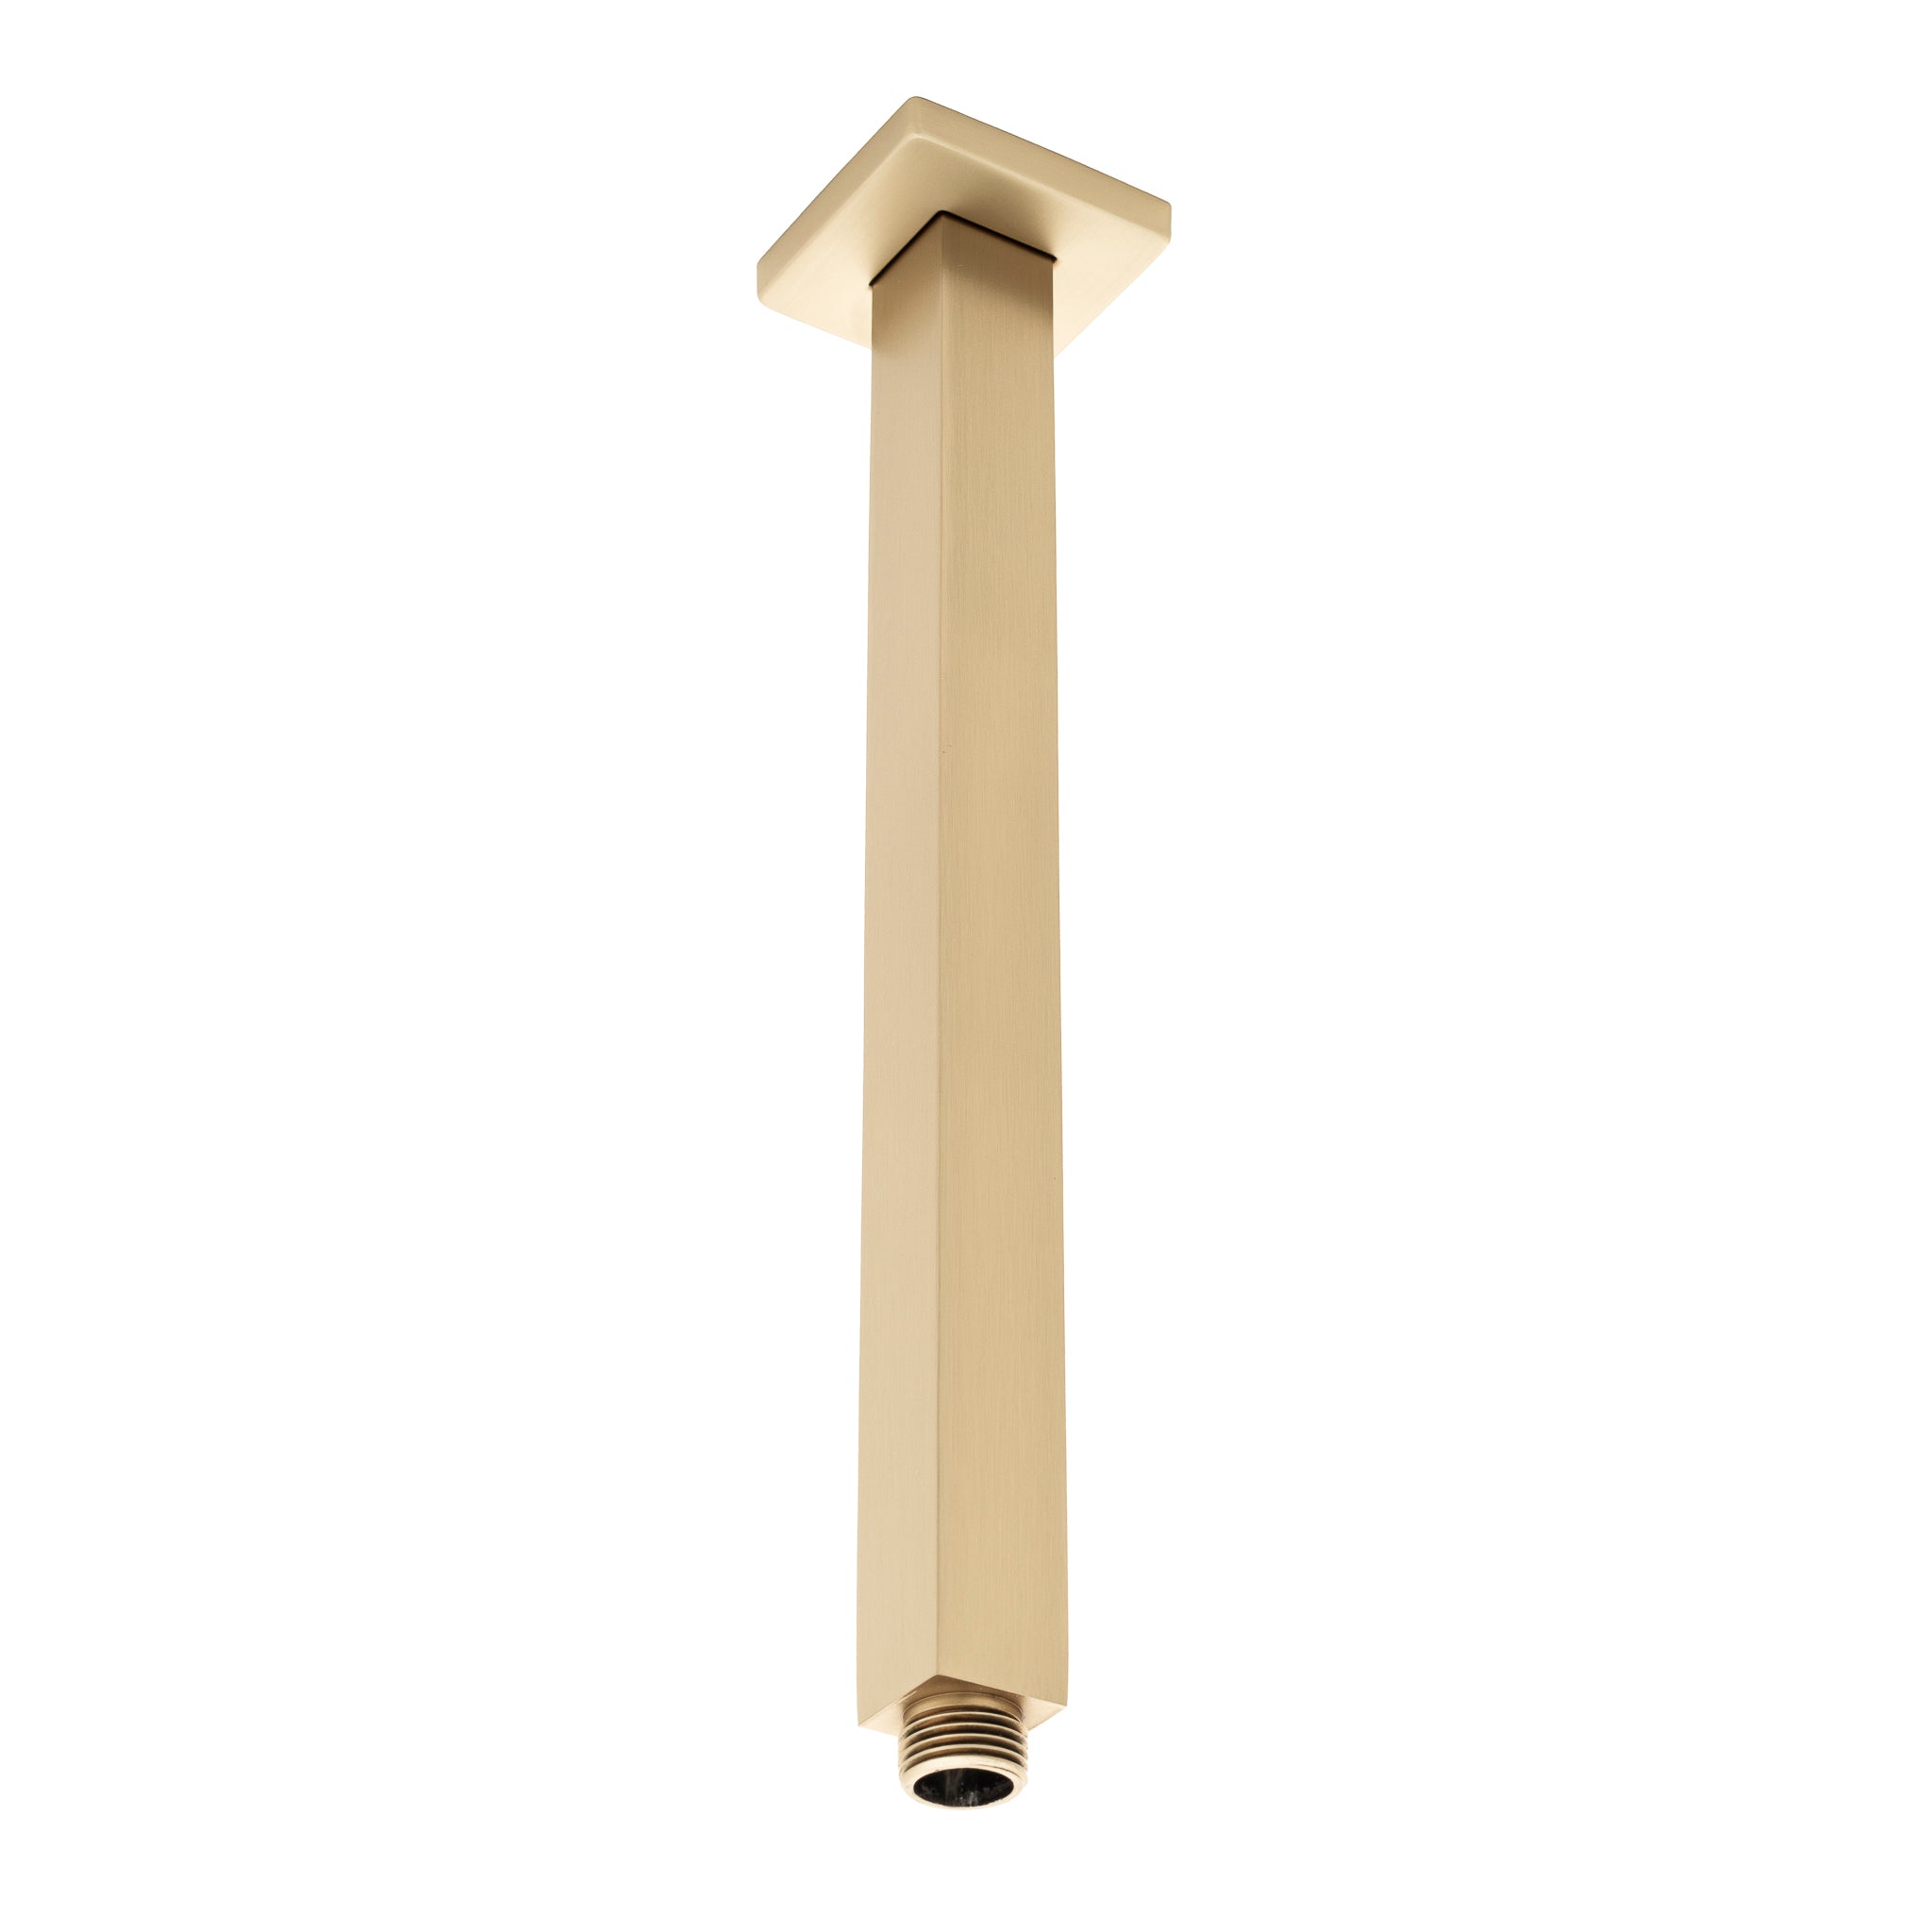 Square 300mm Shower Ceiling Dropper Arm, Brushed Brass (Gold)